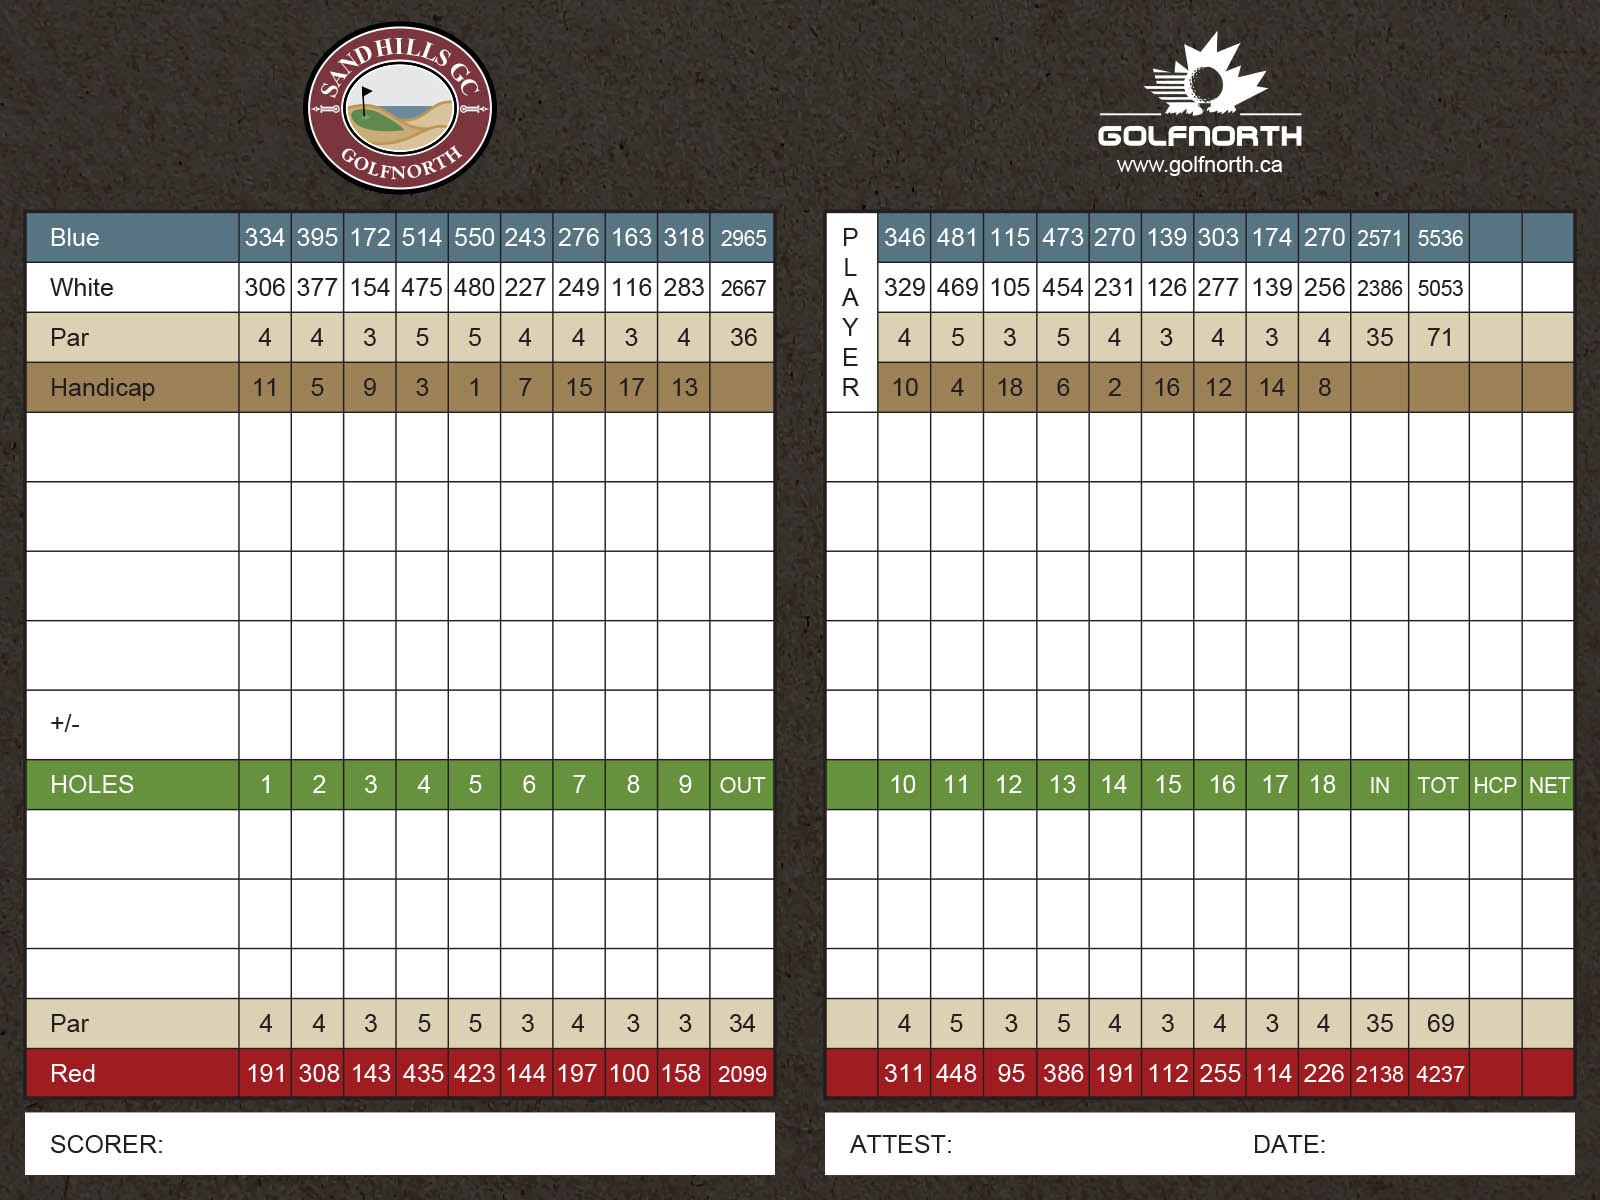 This is an image of Sand Hills Golf Club's scorecard. For those who are visually impaired, please call 1-888-833-8787 for a representative to verbally guide you through the scorecard details.